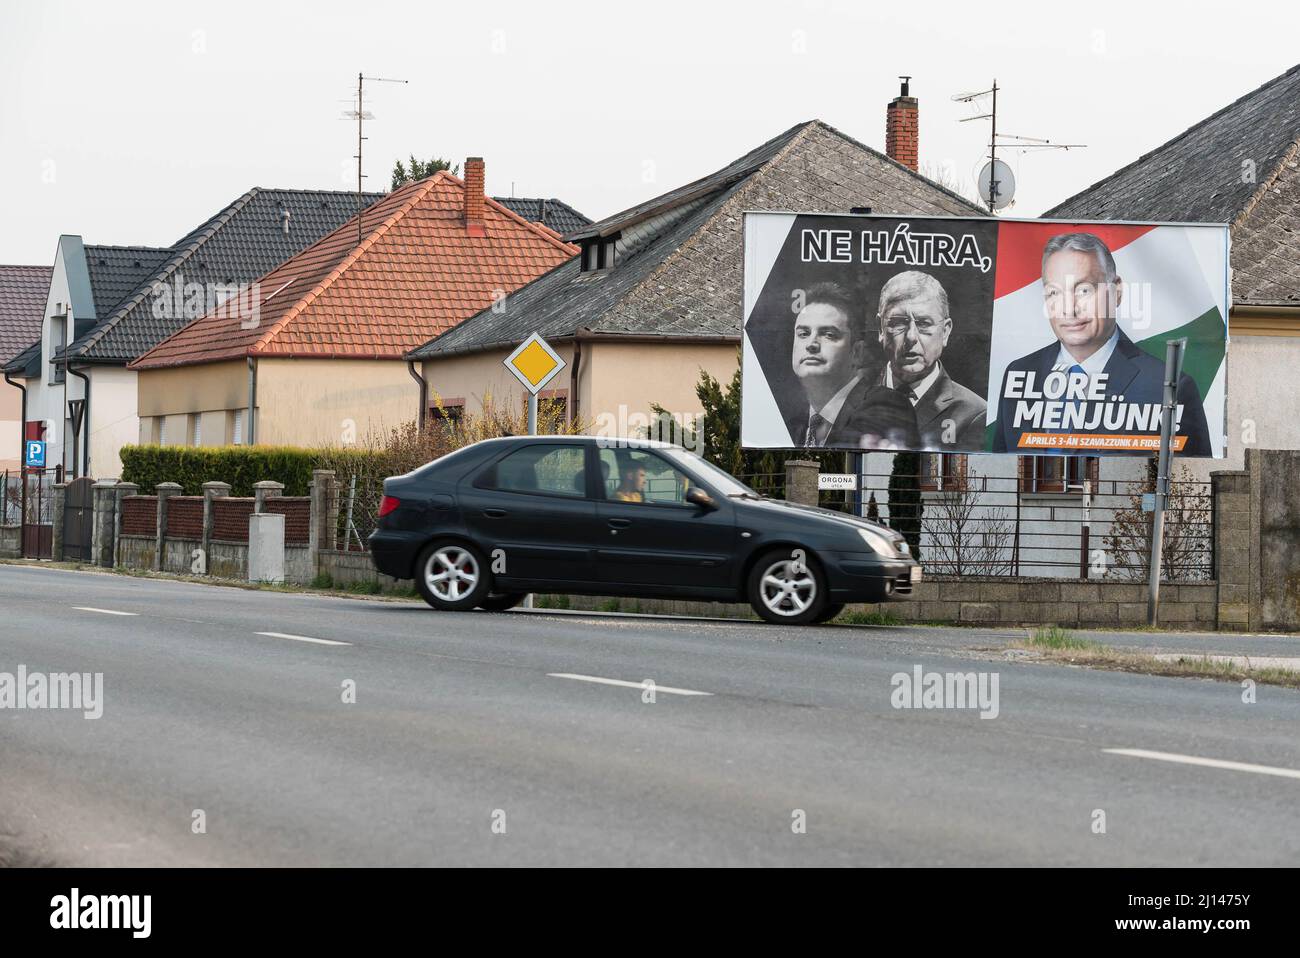 Car pass by election billboard for Fidesz party placed on the street of Mosonmagyarovar. On the billboard (from left to right) the leader of opposition Peter Marki-Zay, former prime minister Ferenc Gyurcsany, and Hungarian prime minister and leader of Fidesz Viktor Orban. Mosonmagyarovar is the town in northwest Hungary located approx. 160 kilometers from Hungarian capital Budapest. Peter Marki-Zay will challenge prime minister Viktor Orban in the upcoming parliamentary elections, which will be held on the 3rd of April 2022. Stock Photo